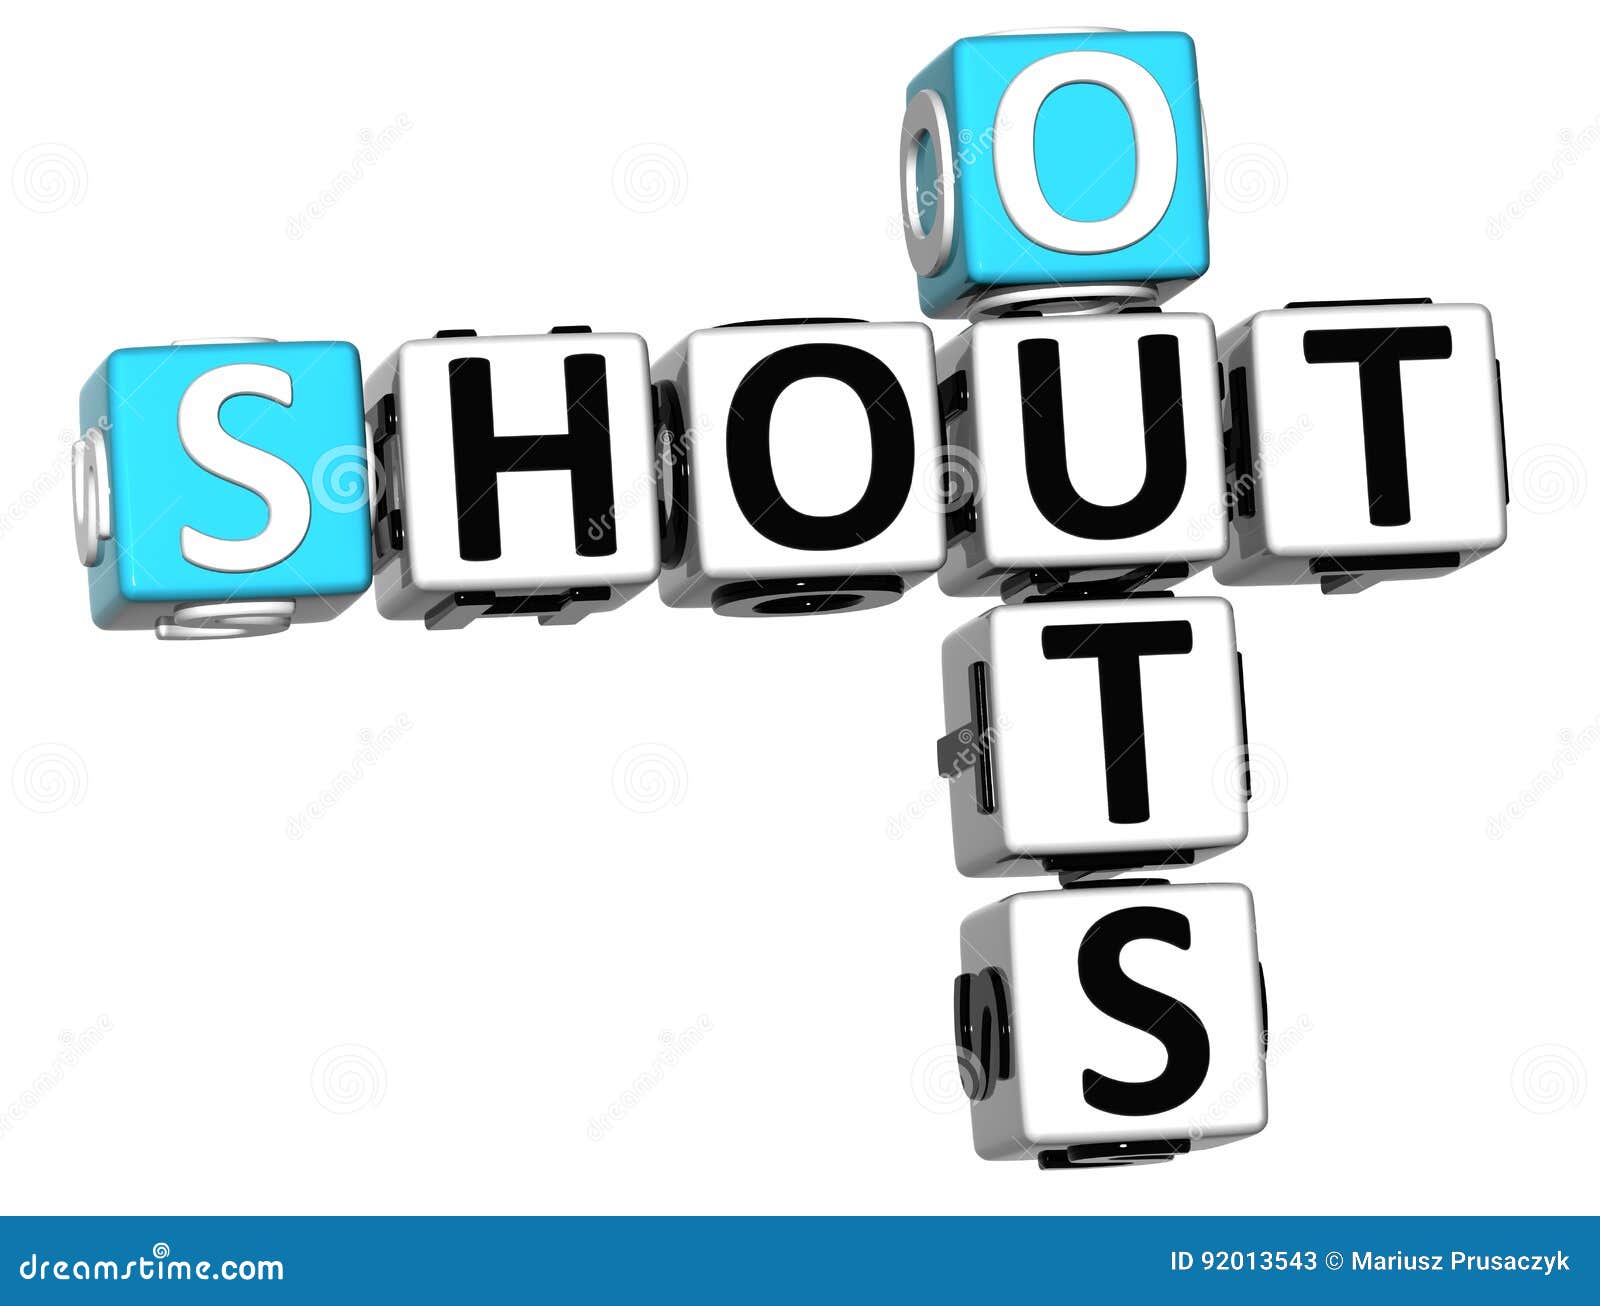 https://thumbs.dreamstime.com/z/d-shout-out-crossword-cube-words-white-background-92013543.jpg